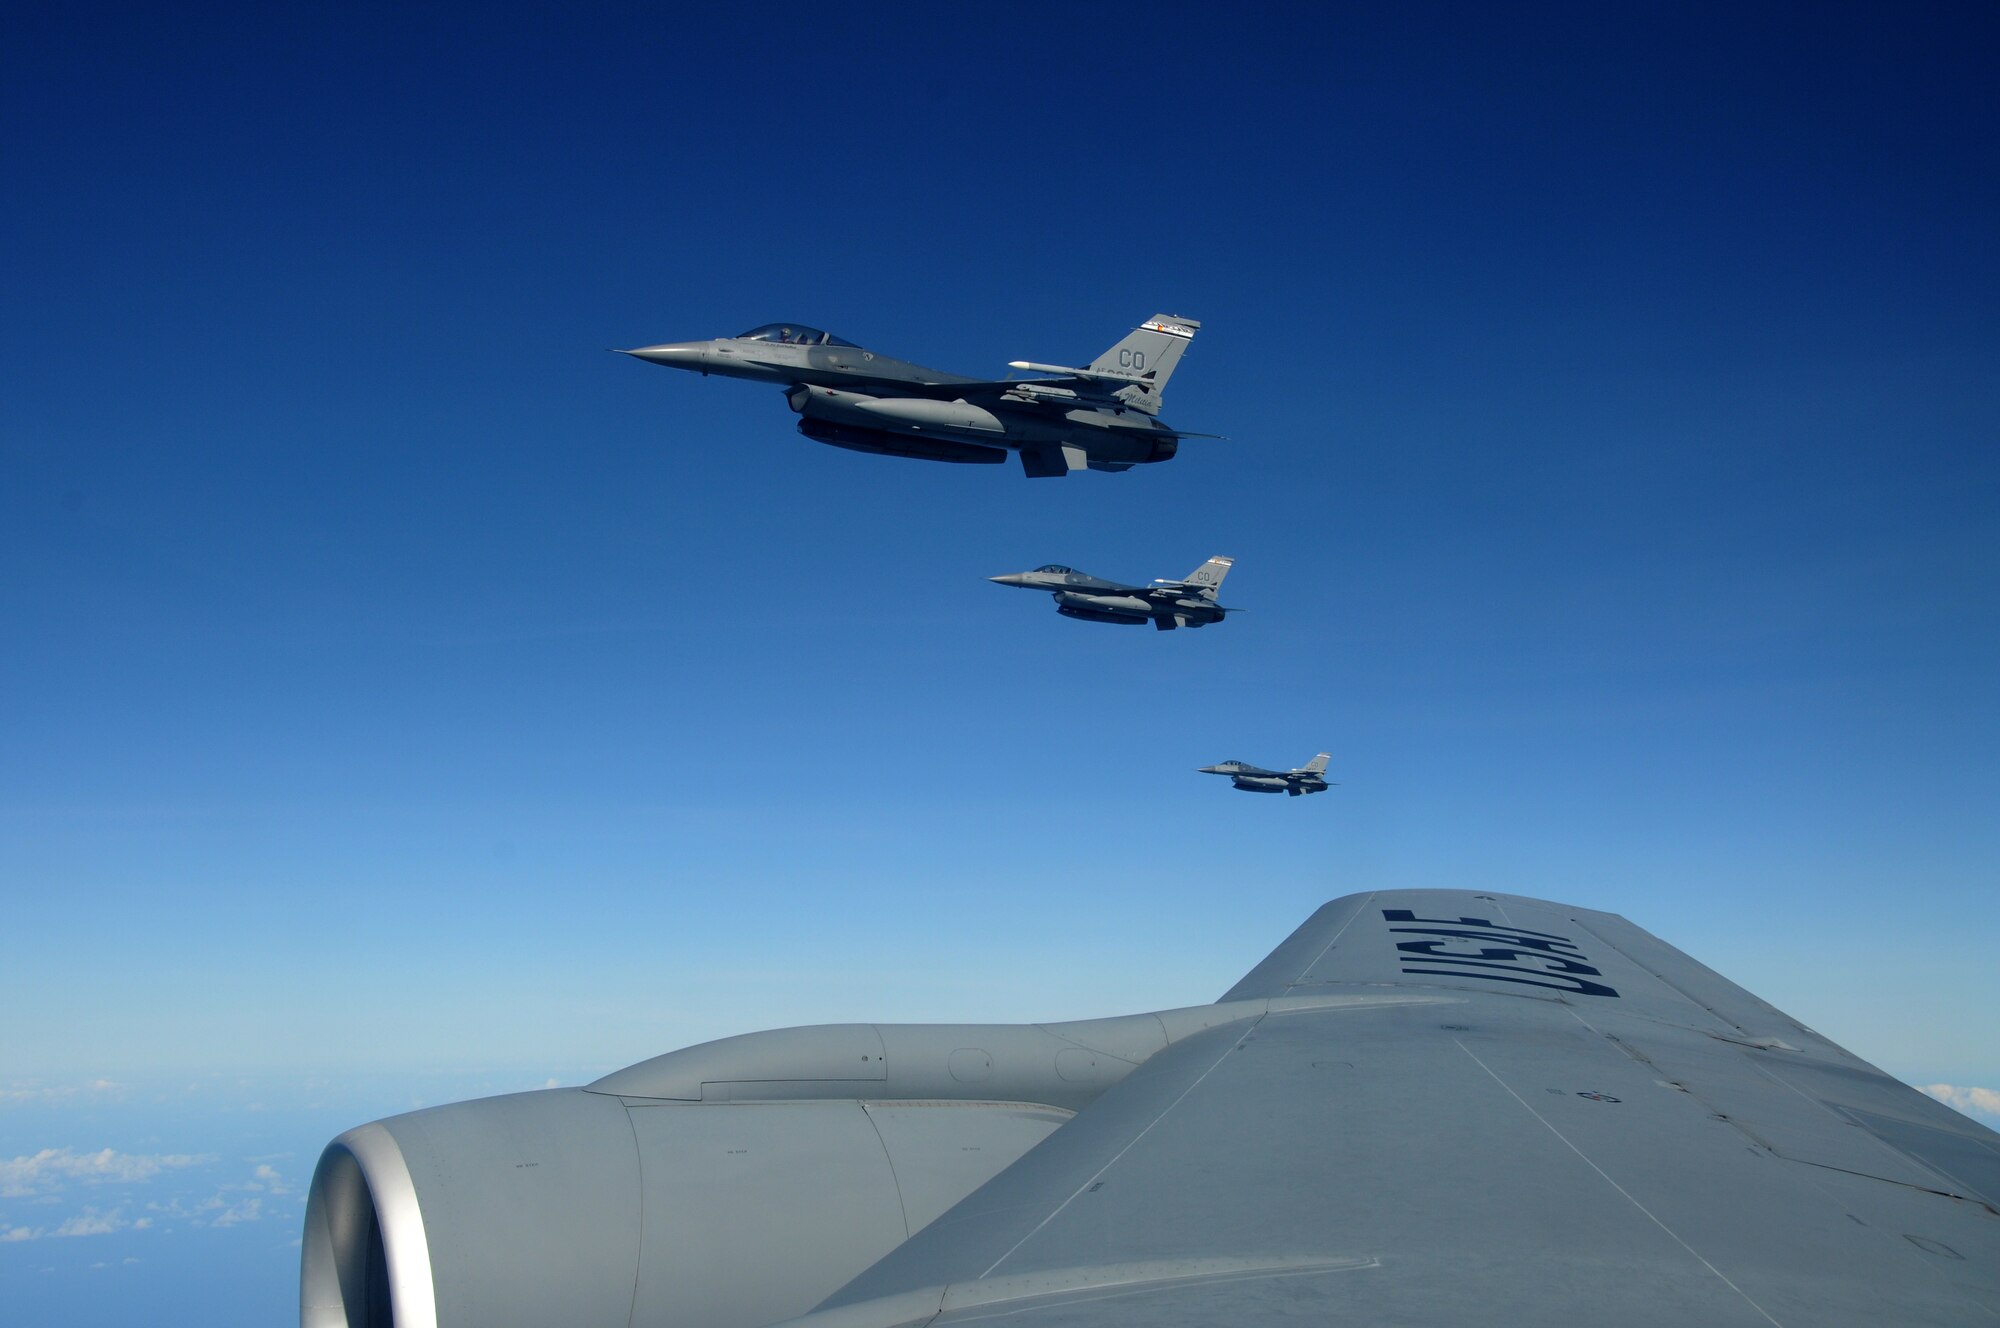 Three F-16 Fighting Falcons from the 140th Fighter Wing, Buckley, Colo., maintain their position as they wait for the last aircraft of their four-ship formation to refuel during CRUZEX November 15, 2010. The 140th Fighter Wing is participating in CRUZEX V, or Cruzeiro Do Sul (Southern Cross).  CRUZEX  is a multi-national combined exercise involving the Air Forces of Argentina, Brazil, Chile, France and Uruguay, and observers from numerous other countries with more than 82 aircraft and almost 3,000 Airmen involved. U.S. Air Force Photo by Master Sgt. Kelly Deitloff